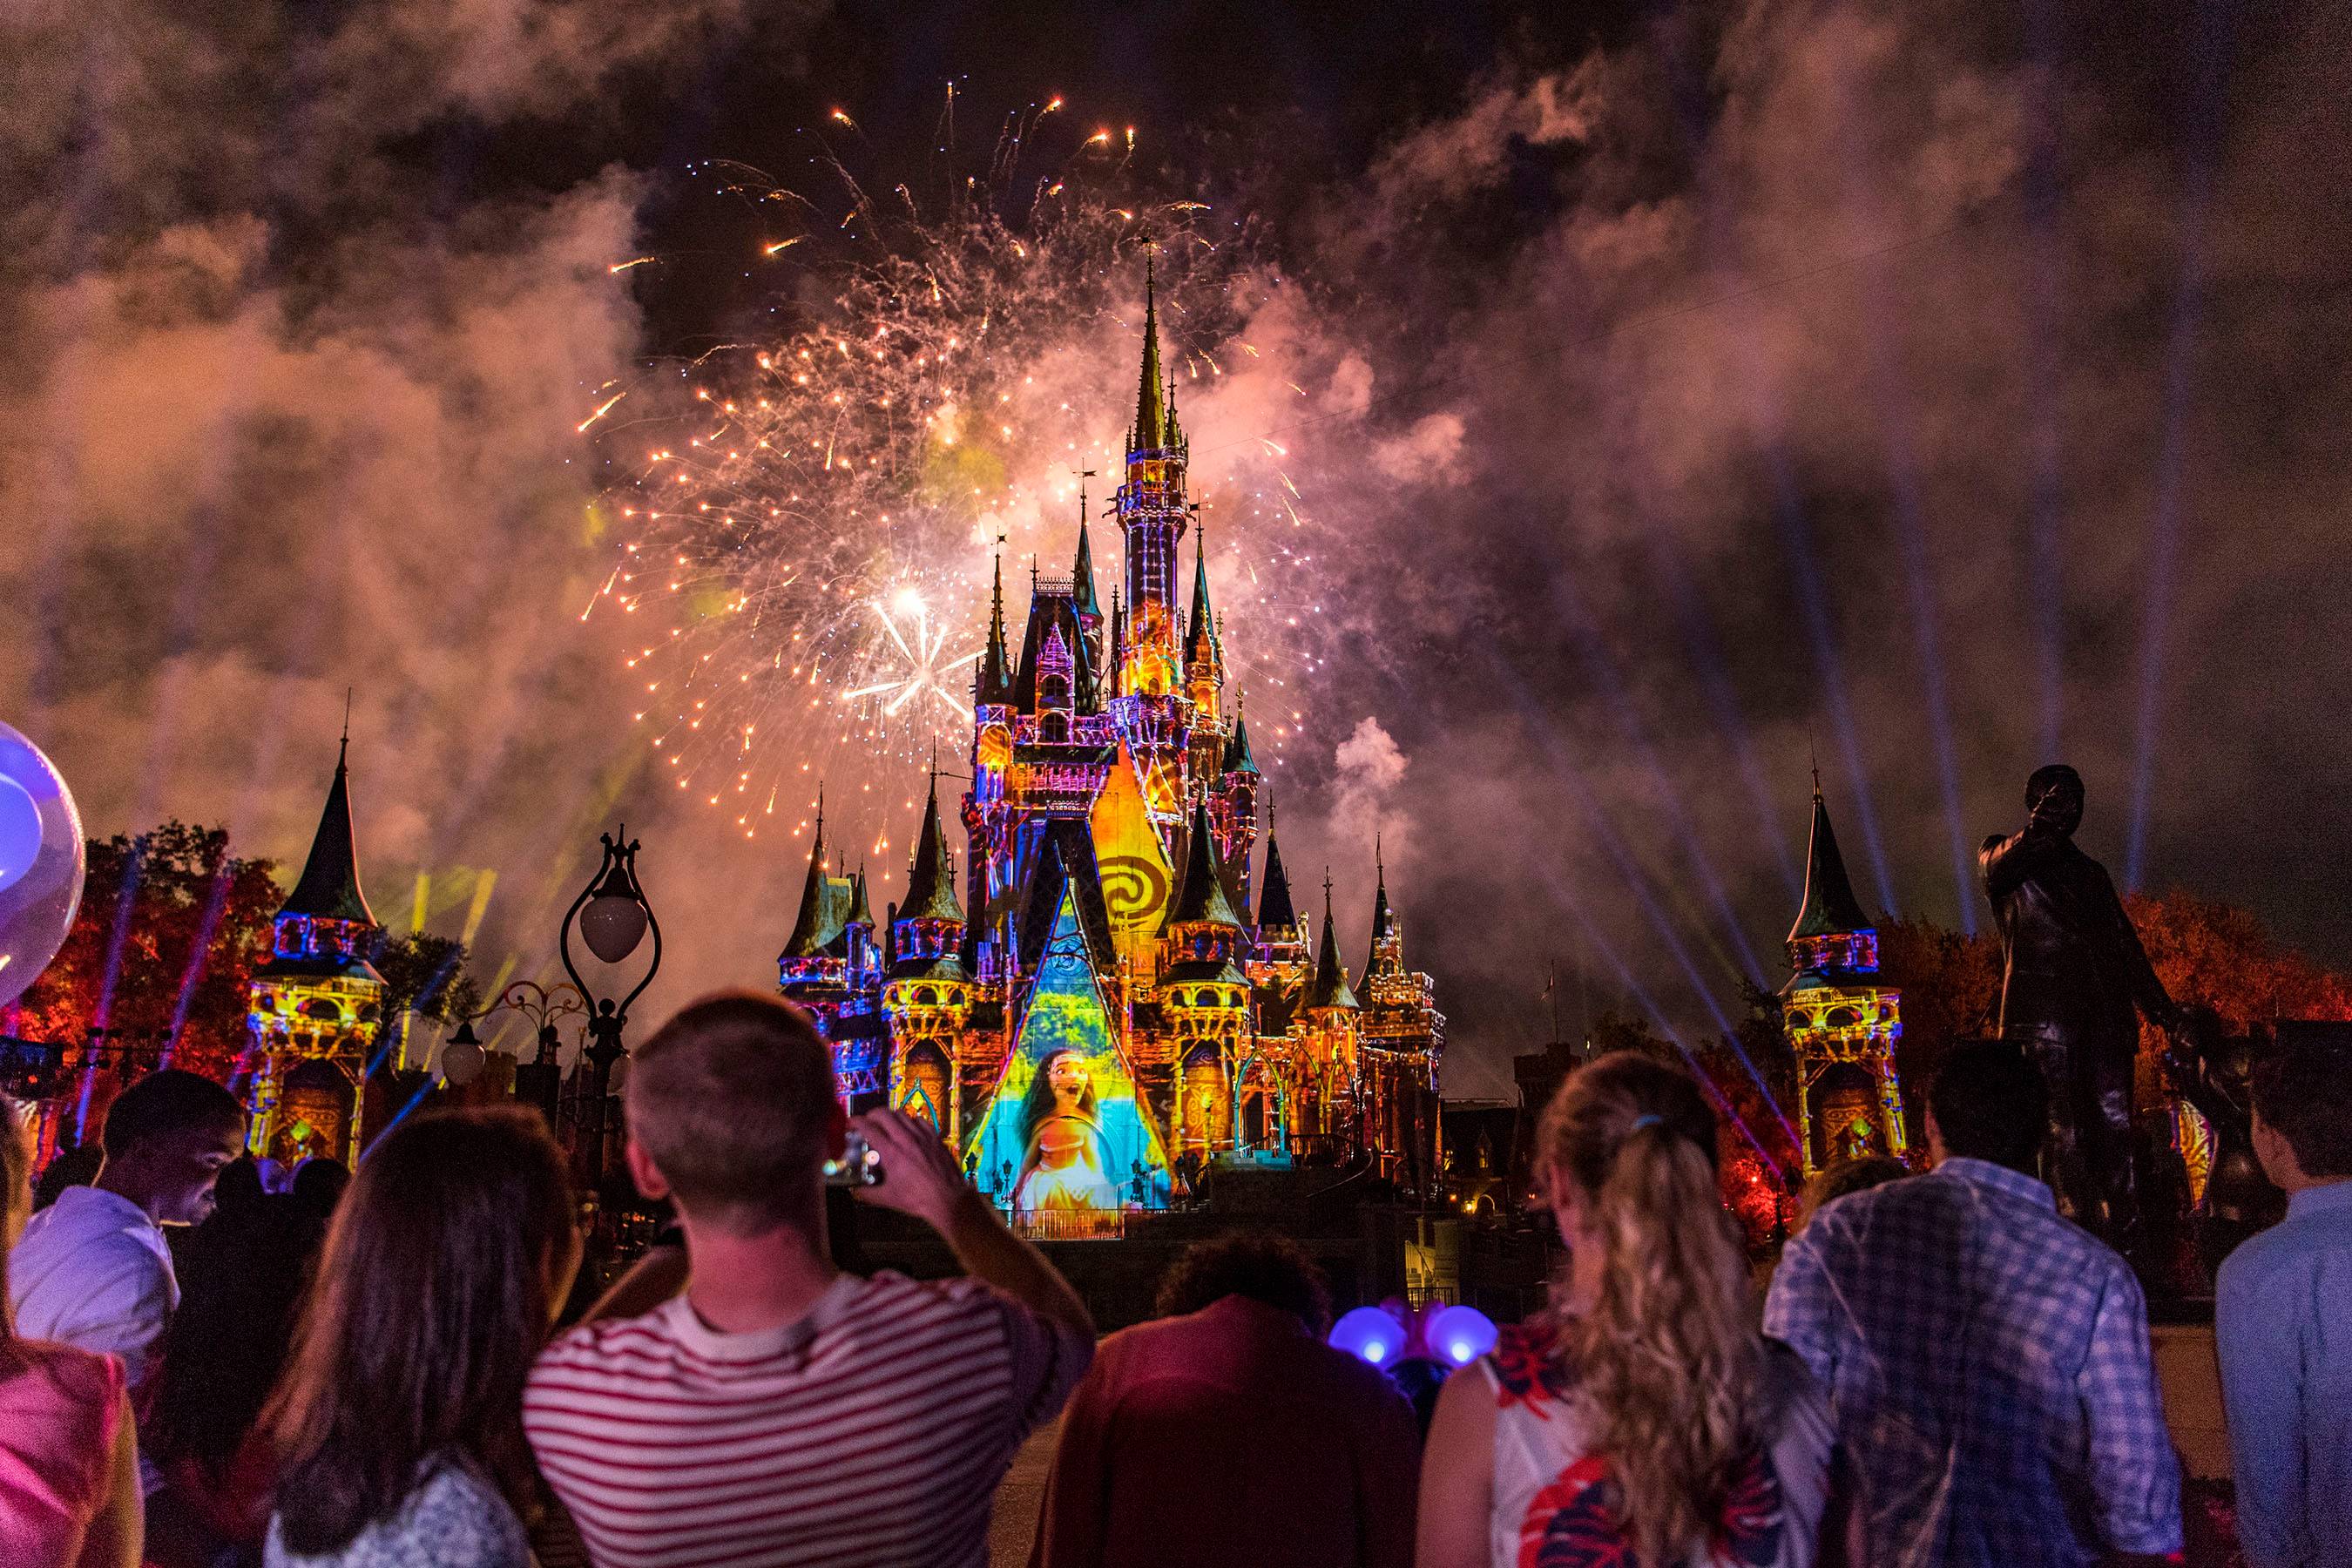 Review of Happily Ever After